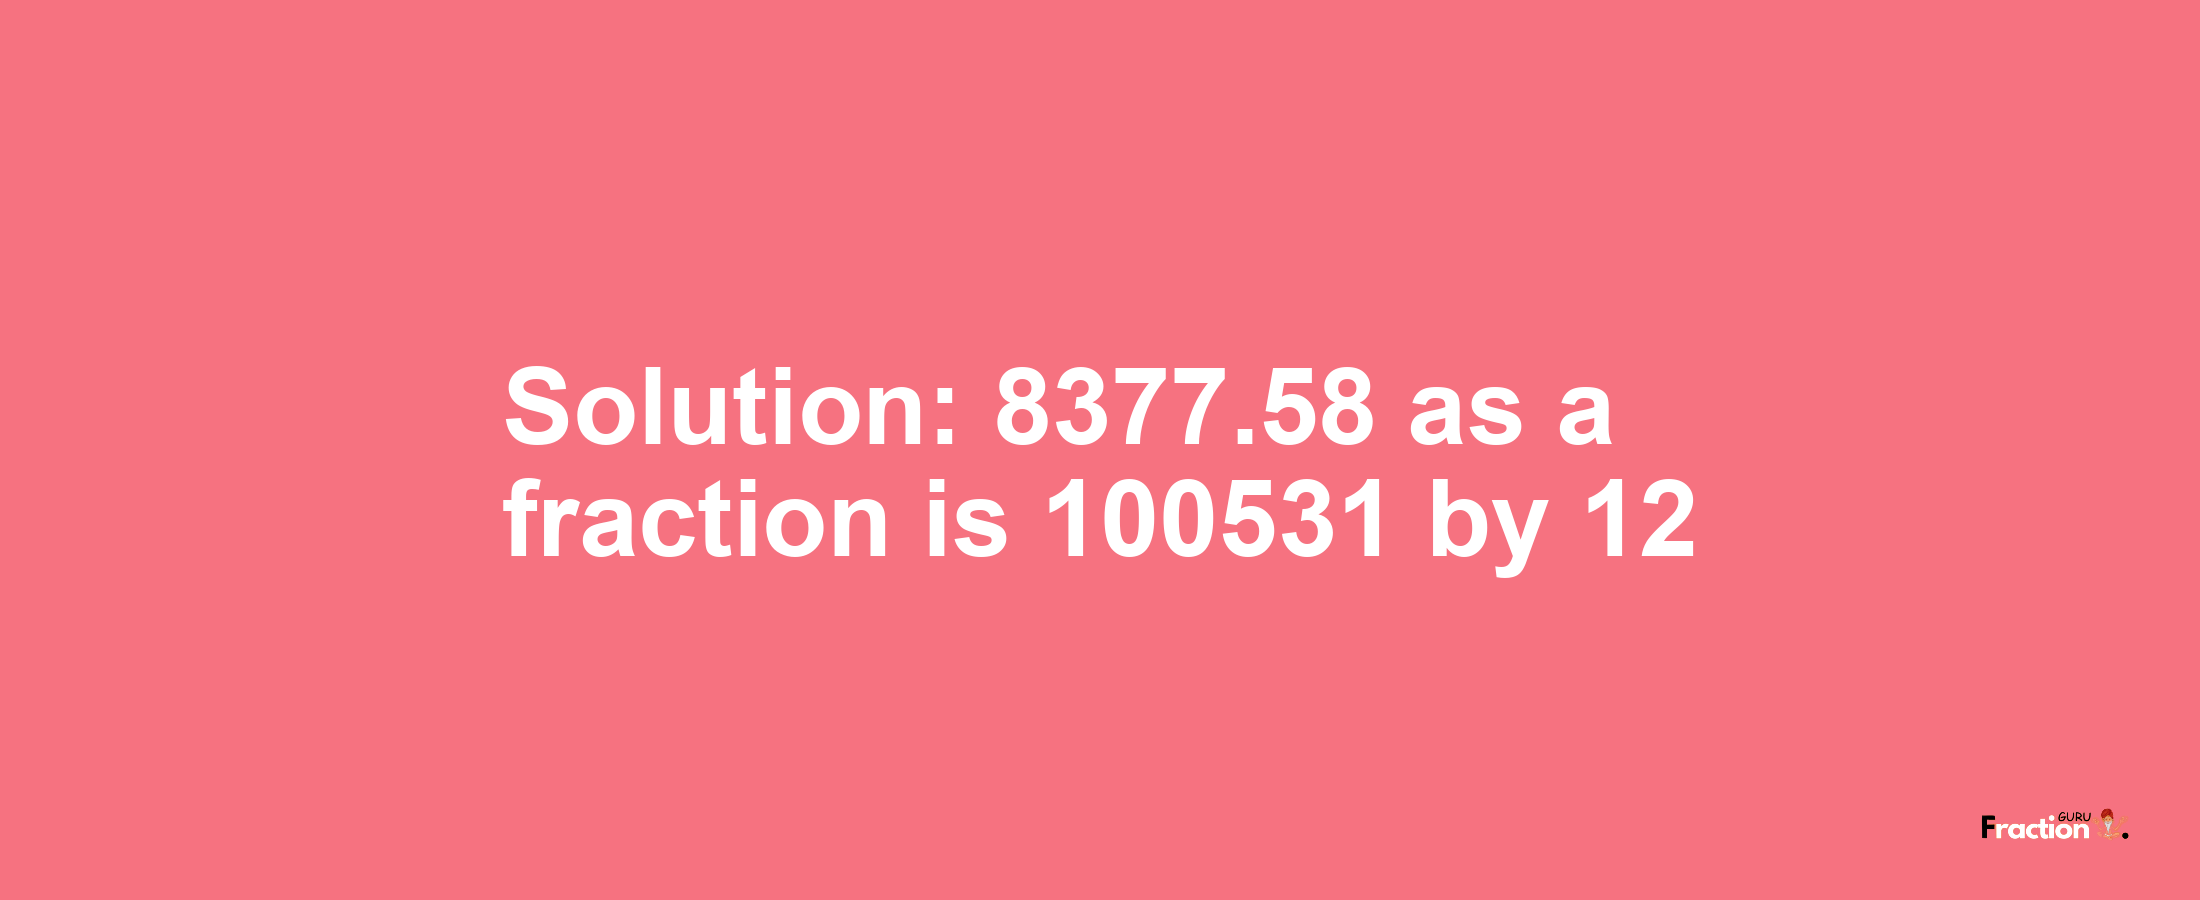 Solution:8377.58 as a fraction is 100531/12